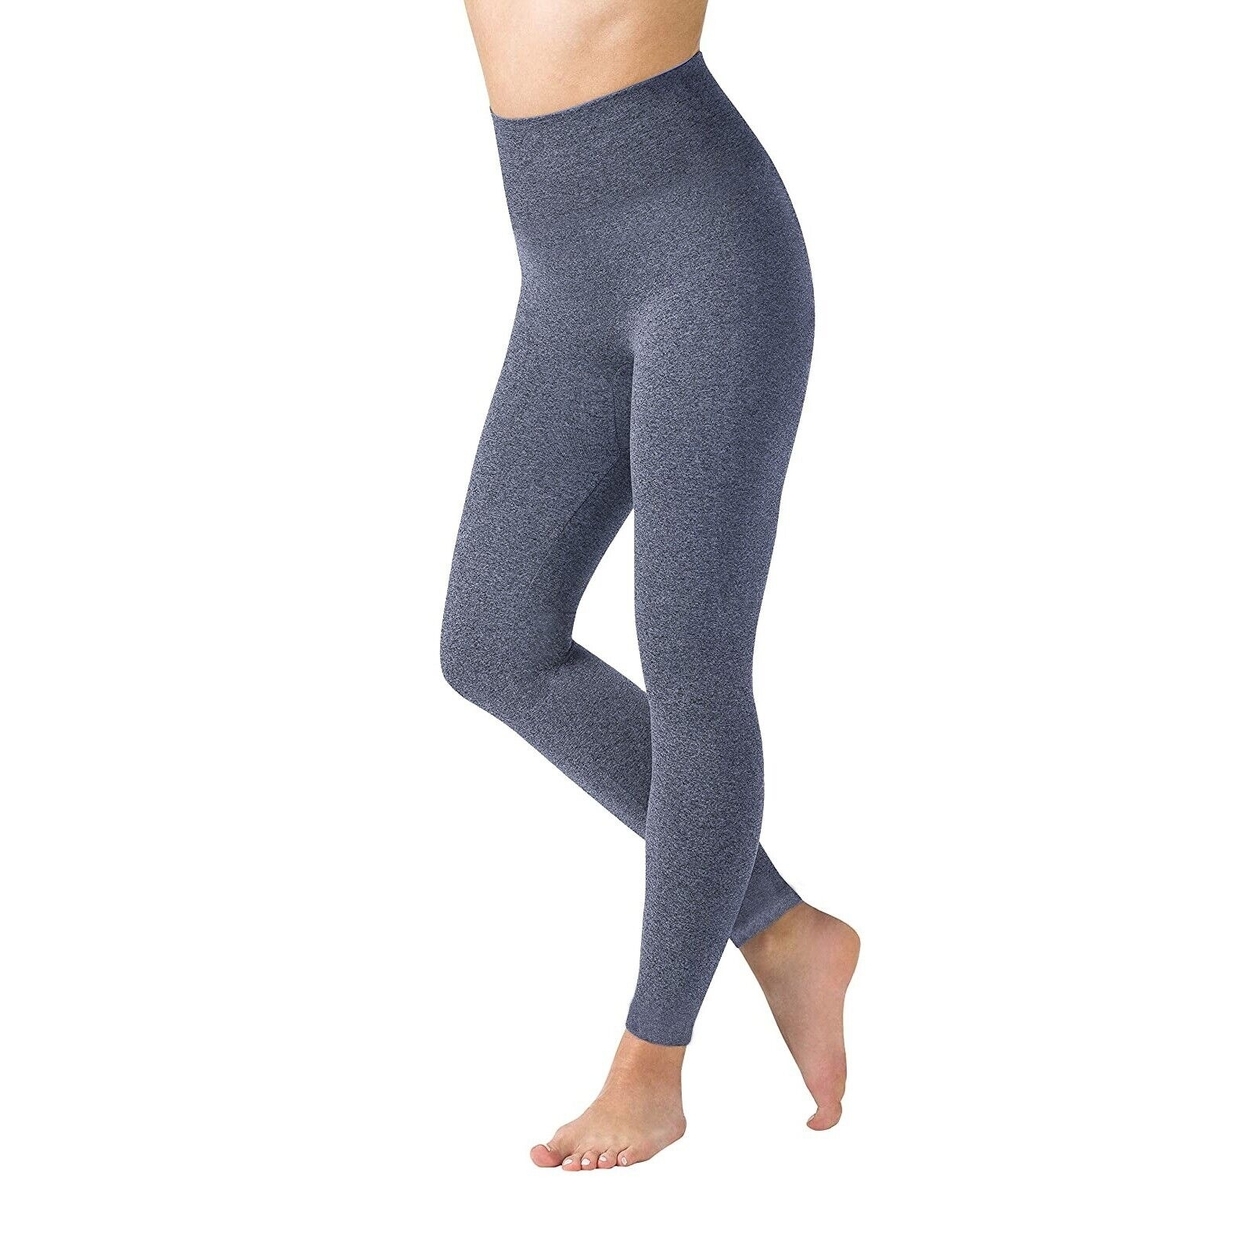 Multi-Packs Women High Waisted Fleece Lined Marled Leggings Ultra Soft Warm Pant - Charcoal/navy, 2, 2x